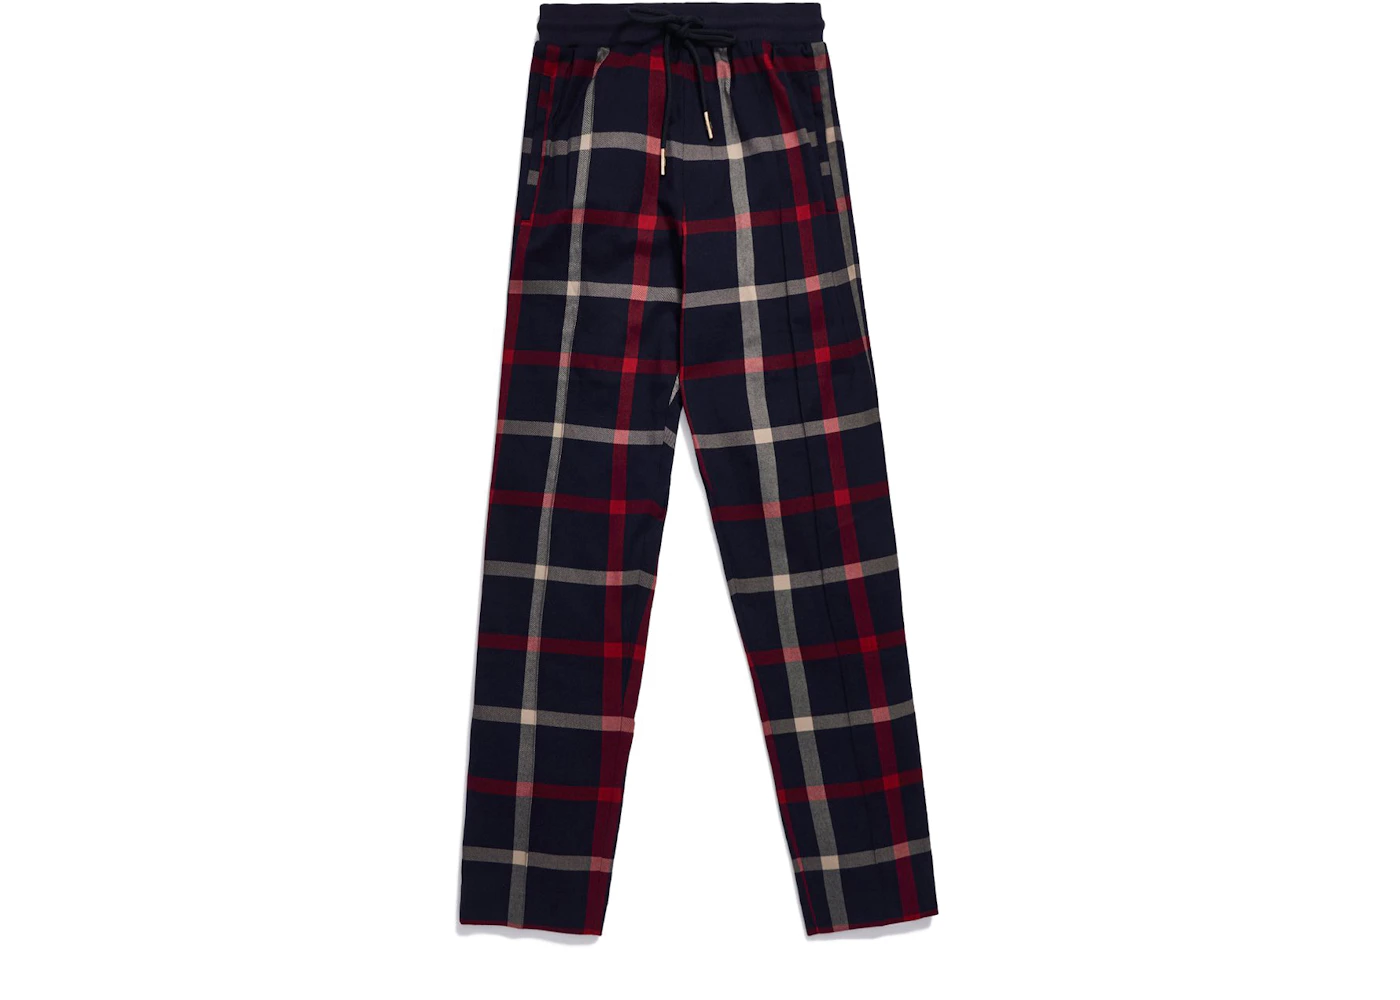 Kith for Bergdorf Goodman Roger Track Pant Navy/Red Plaid Men's - FW20 - US